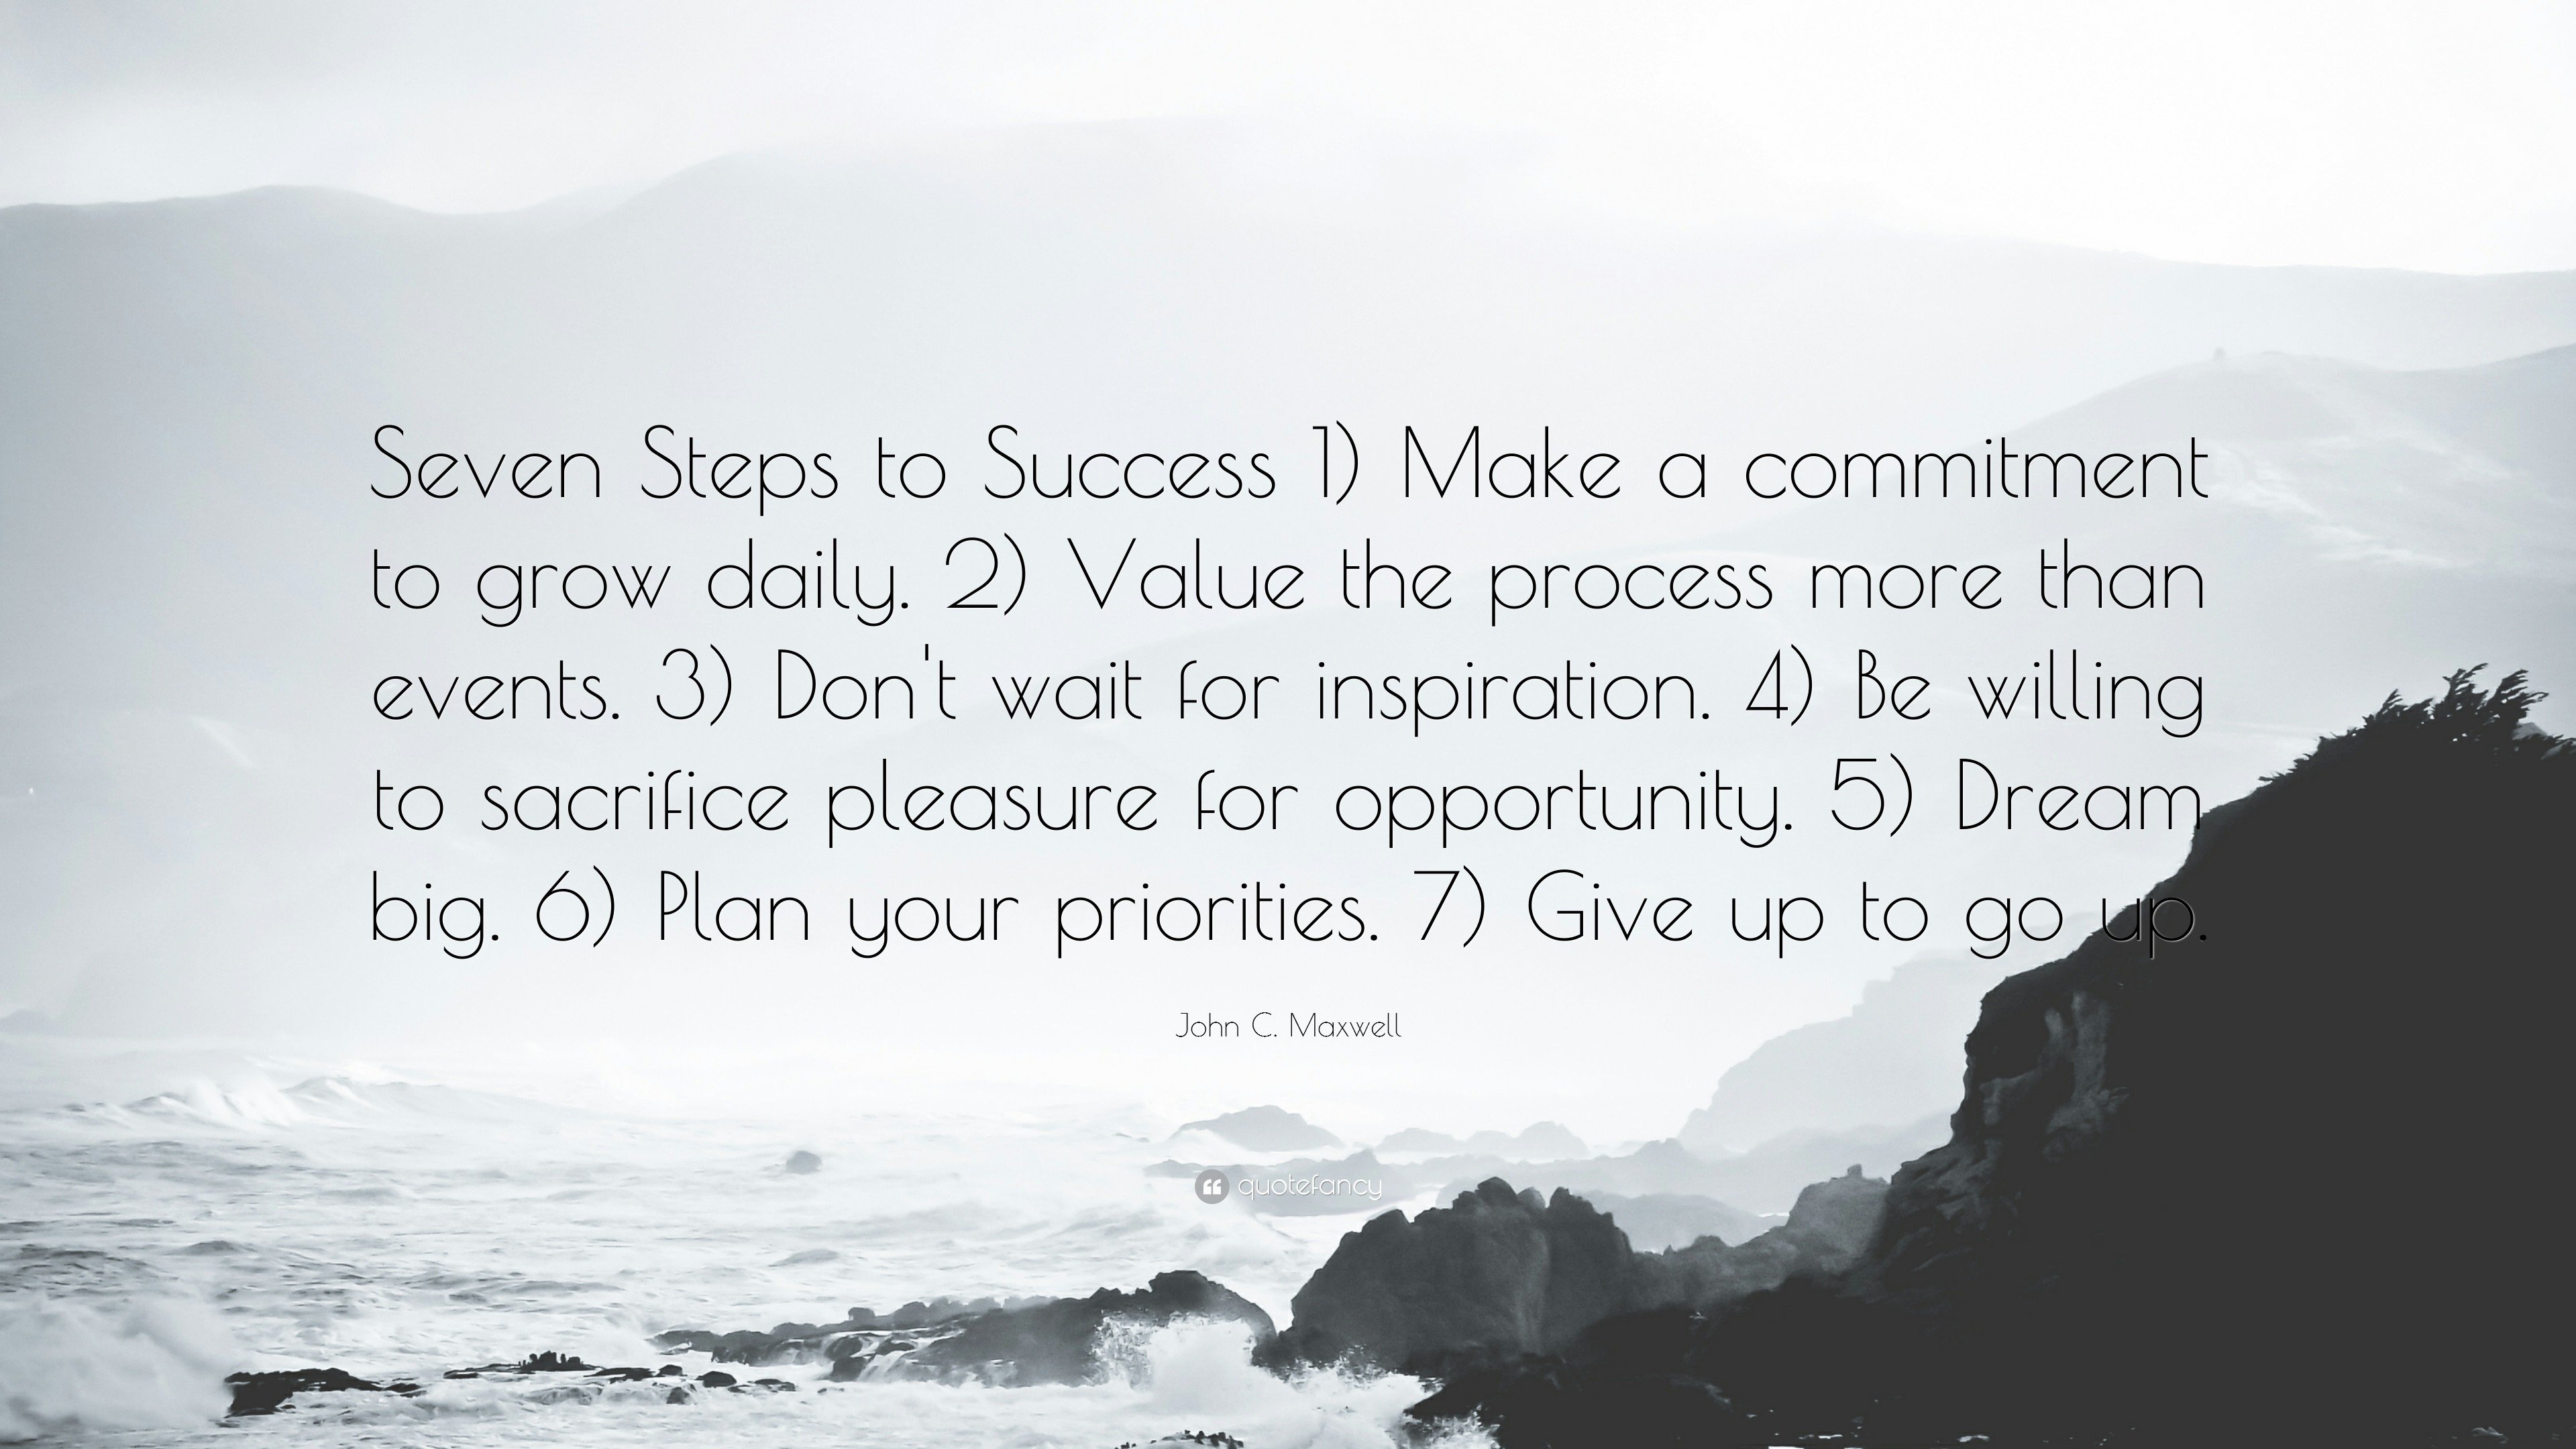 3840x2160 Success Quotes: “Seven Steps to Success 1) Make a commitment to grow daily